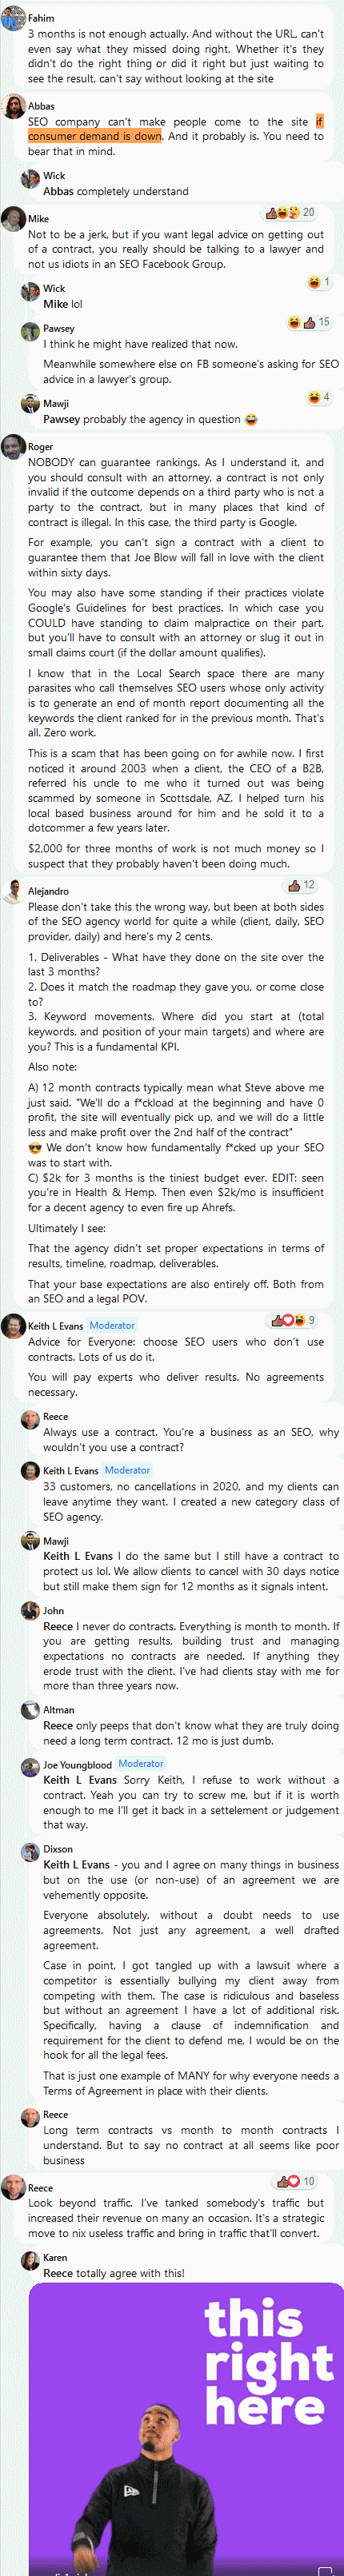 someone asked for legal advice s he wanted to cancel a 12-month seo contract due to roi unreached after the first 3-month